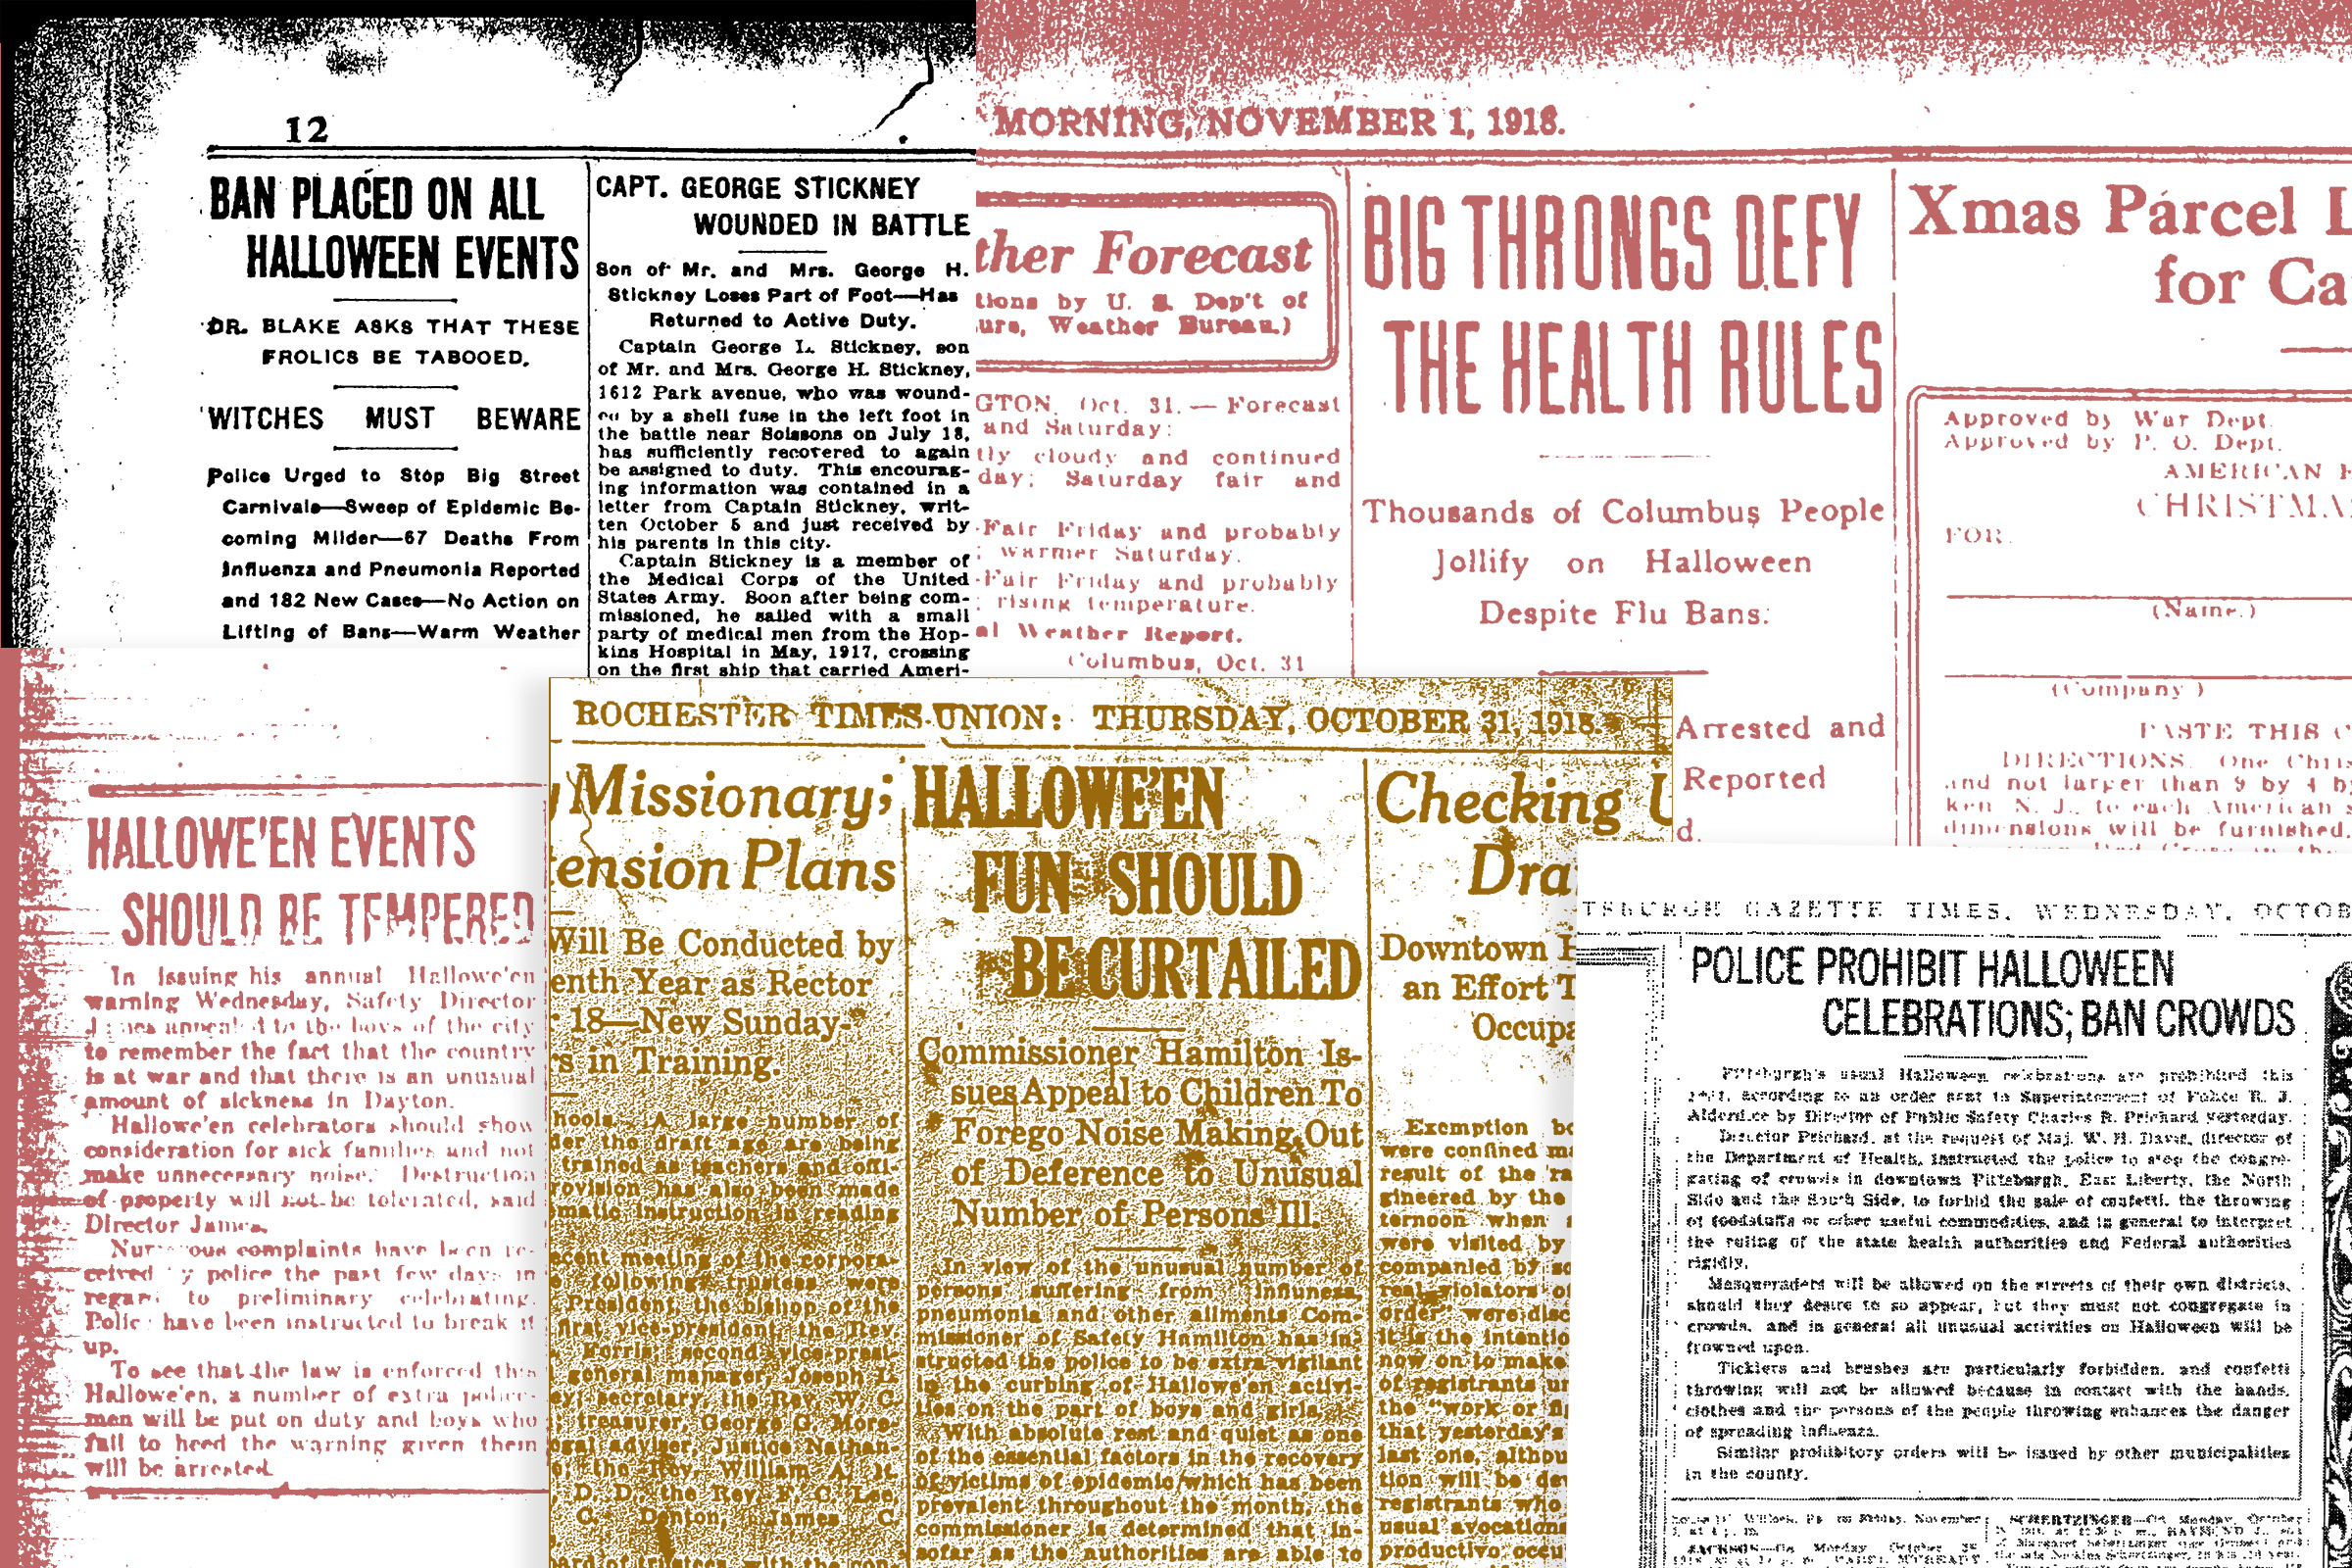 Newspaper headlines about Halloween precautions, 1918 (Influenza Encyclopedia/University of Michigan Center for the History of Medicine and Michigan Publishing, University of Michigan Library)